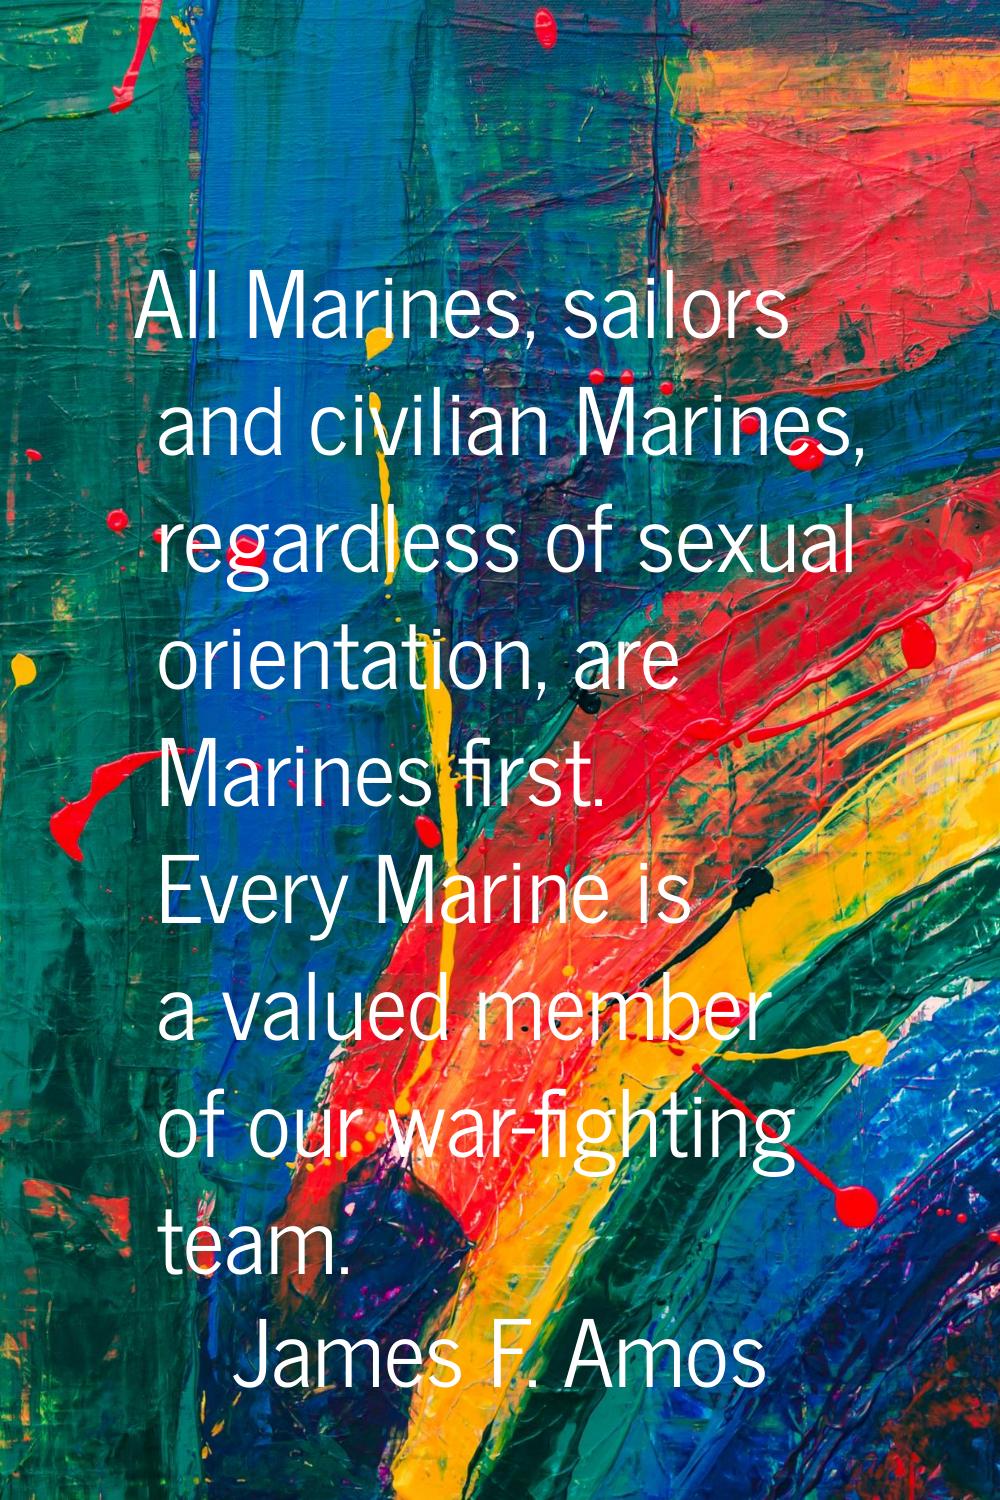 All Marines, sailors and civilian Marines, regardless of sexual orientation, are Marines first. Eve